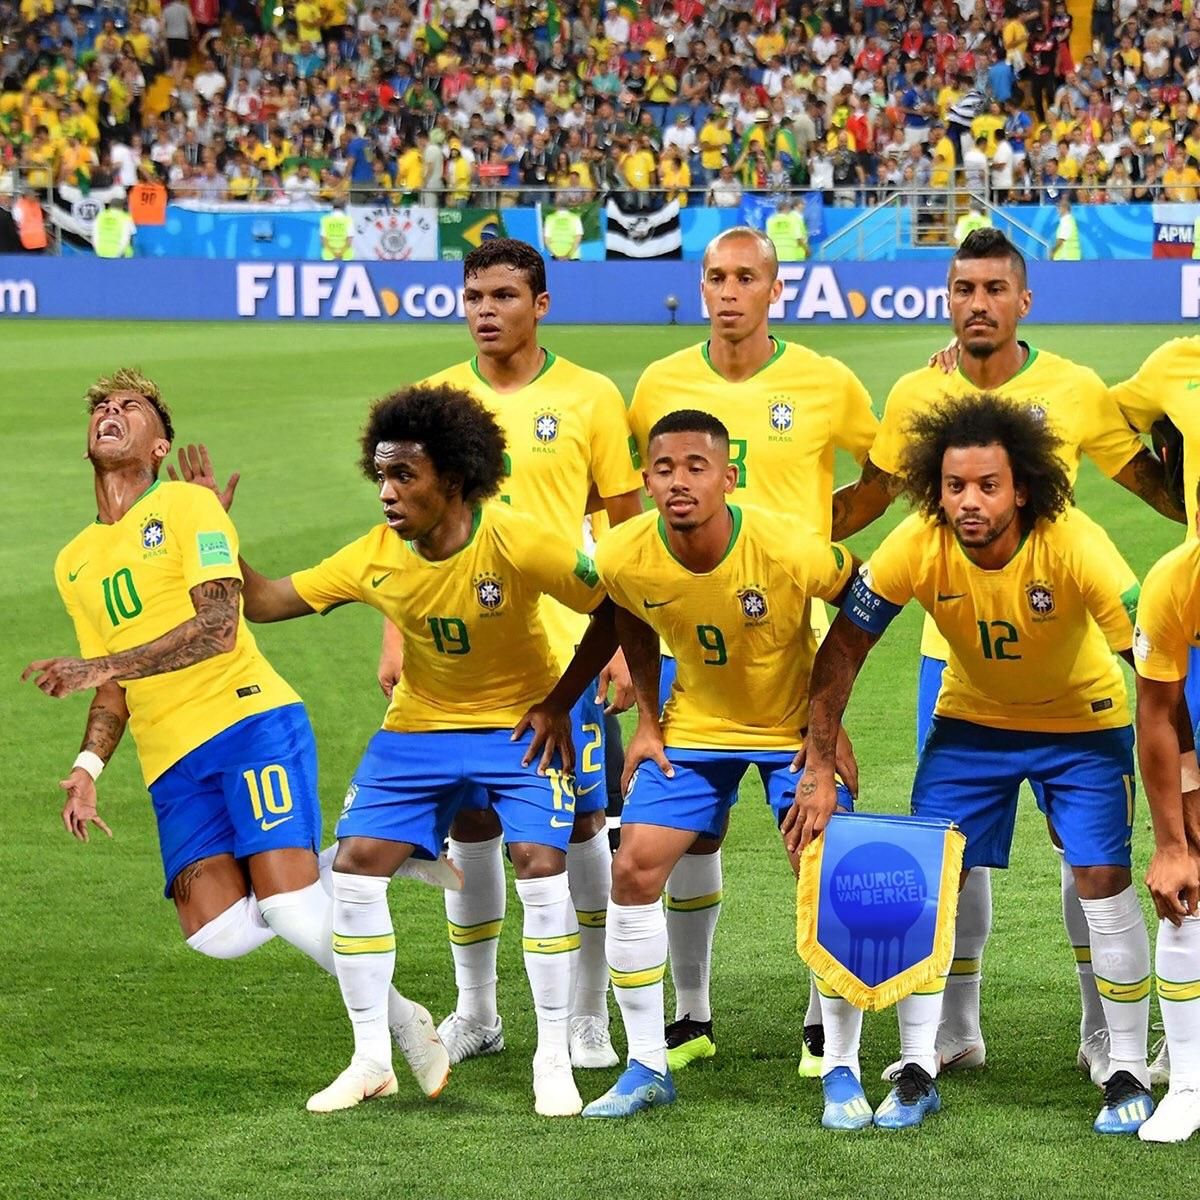 Neymar questionable for next game after team picture leaves him writhing in pain.